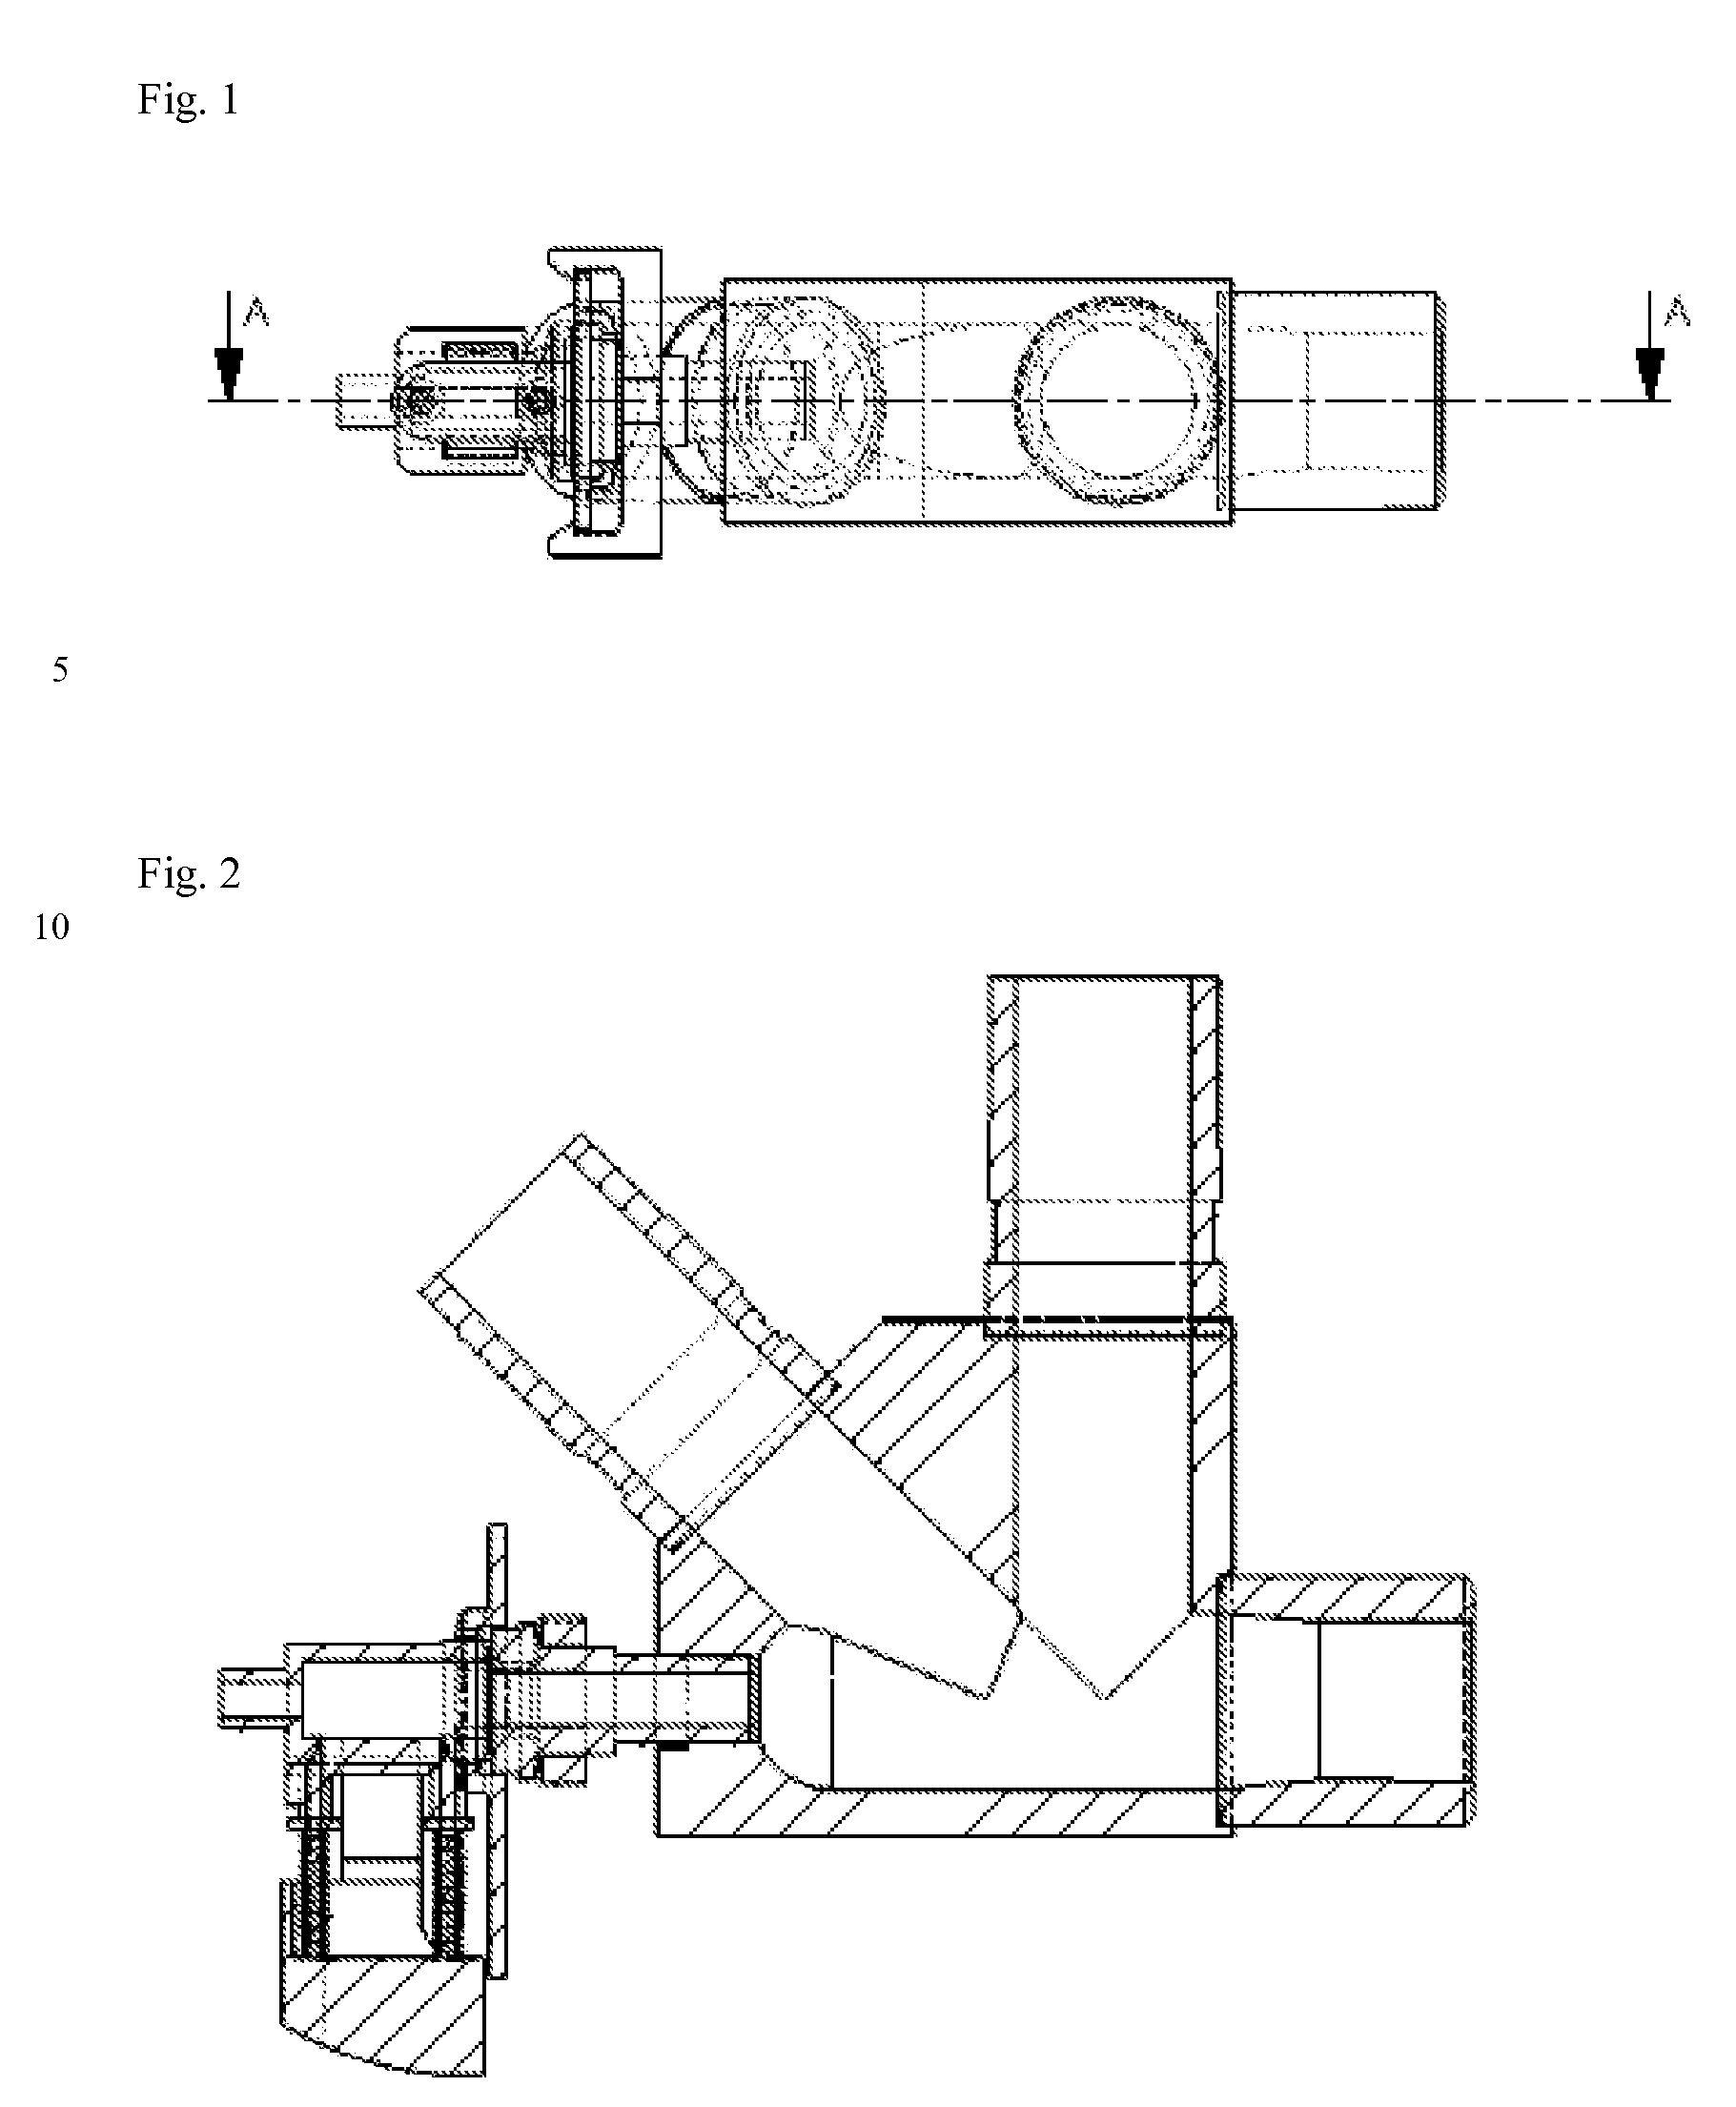 Adapter for inhalation appliances for treatment of artificially ventilated patients